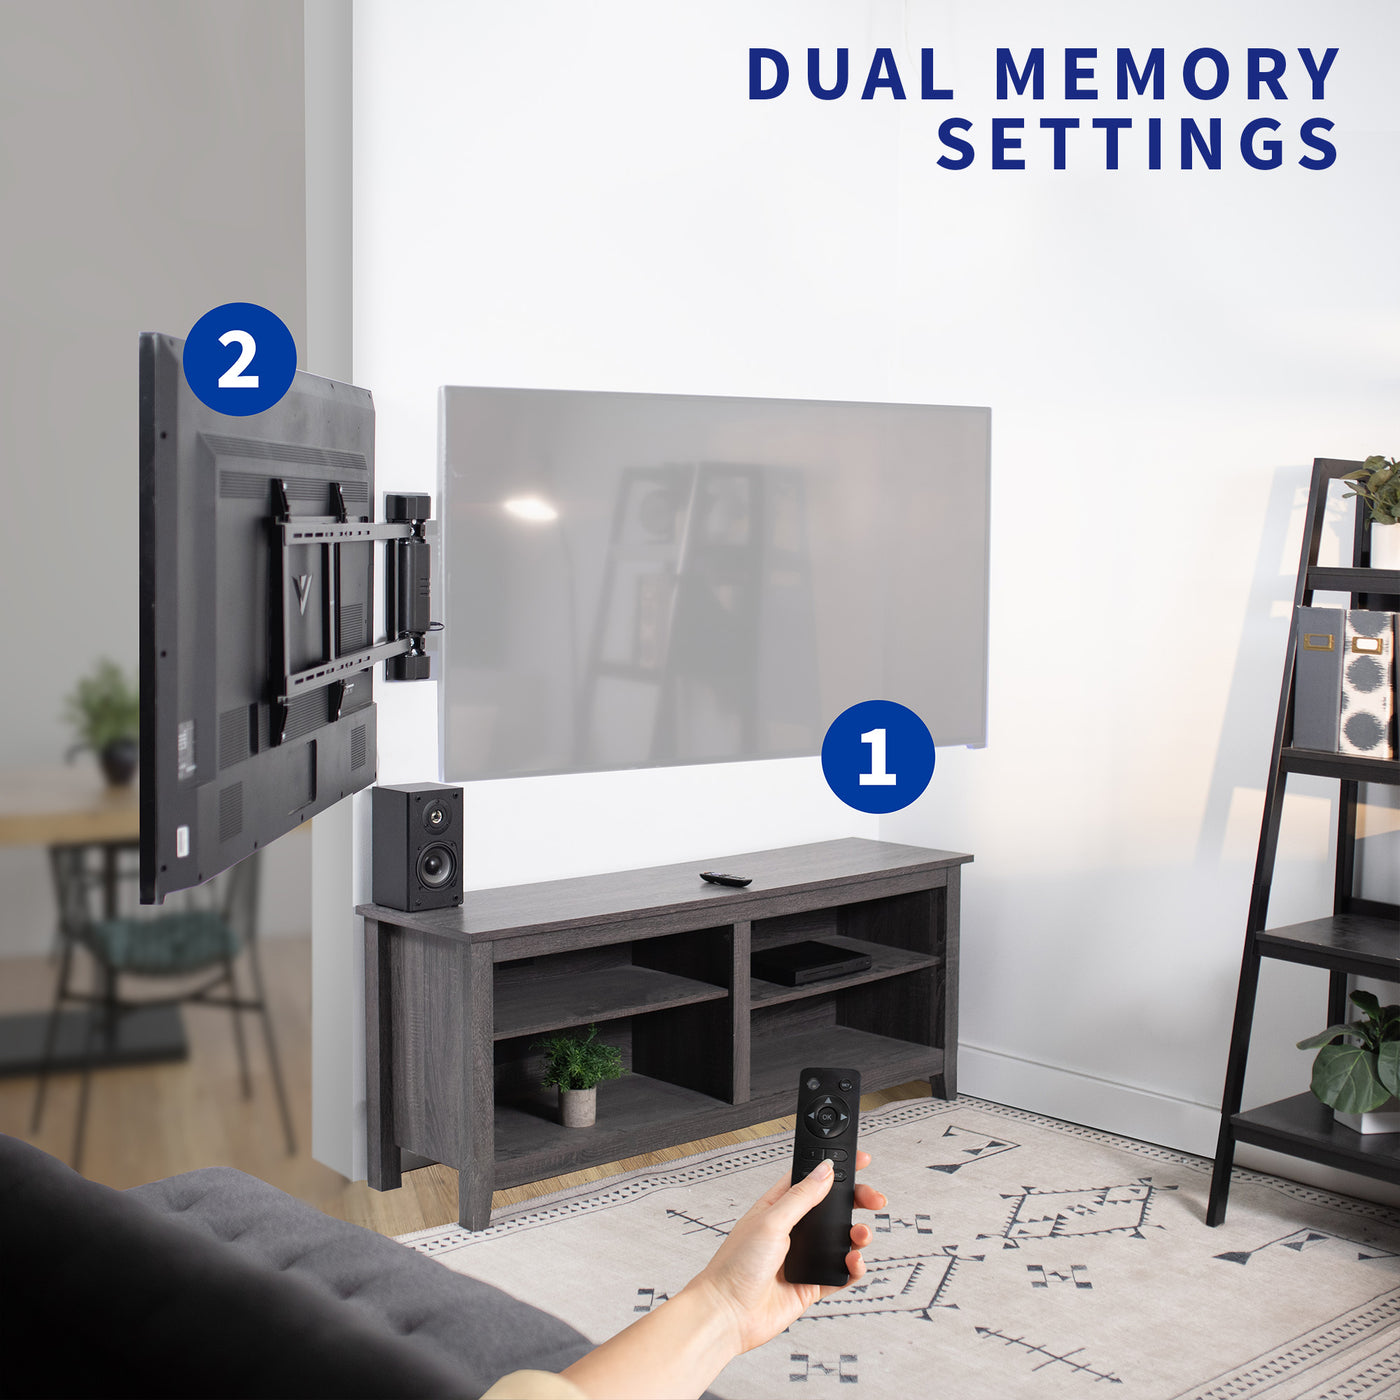 Two built-in memory settings for TV easy adjustments.